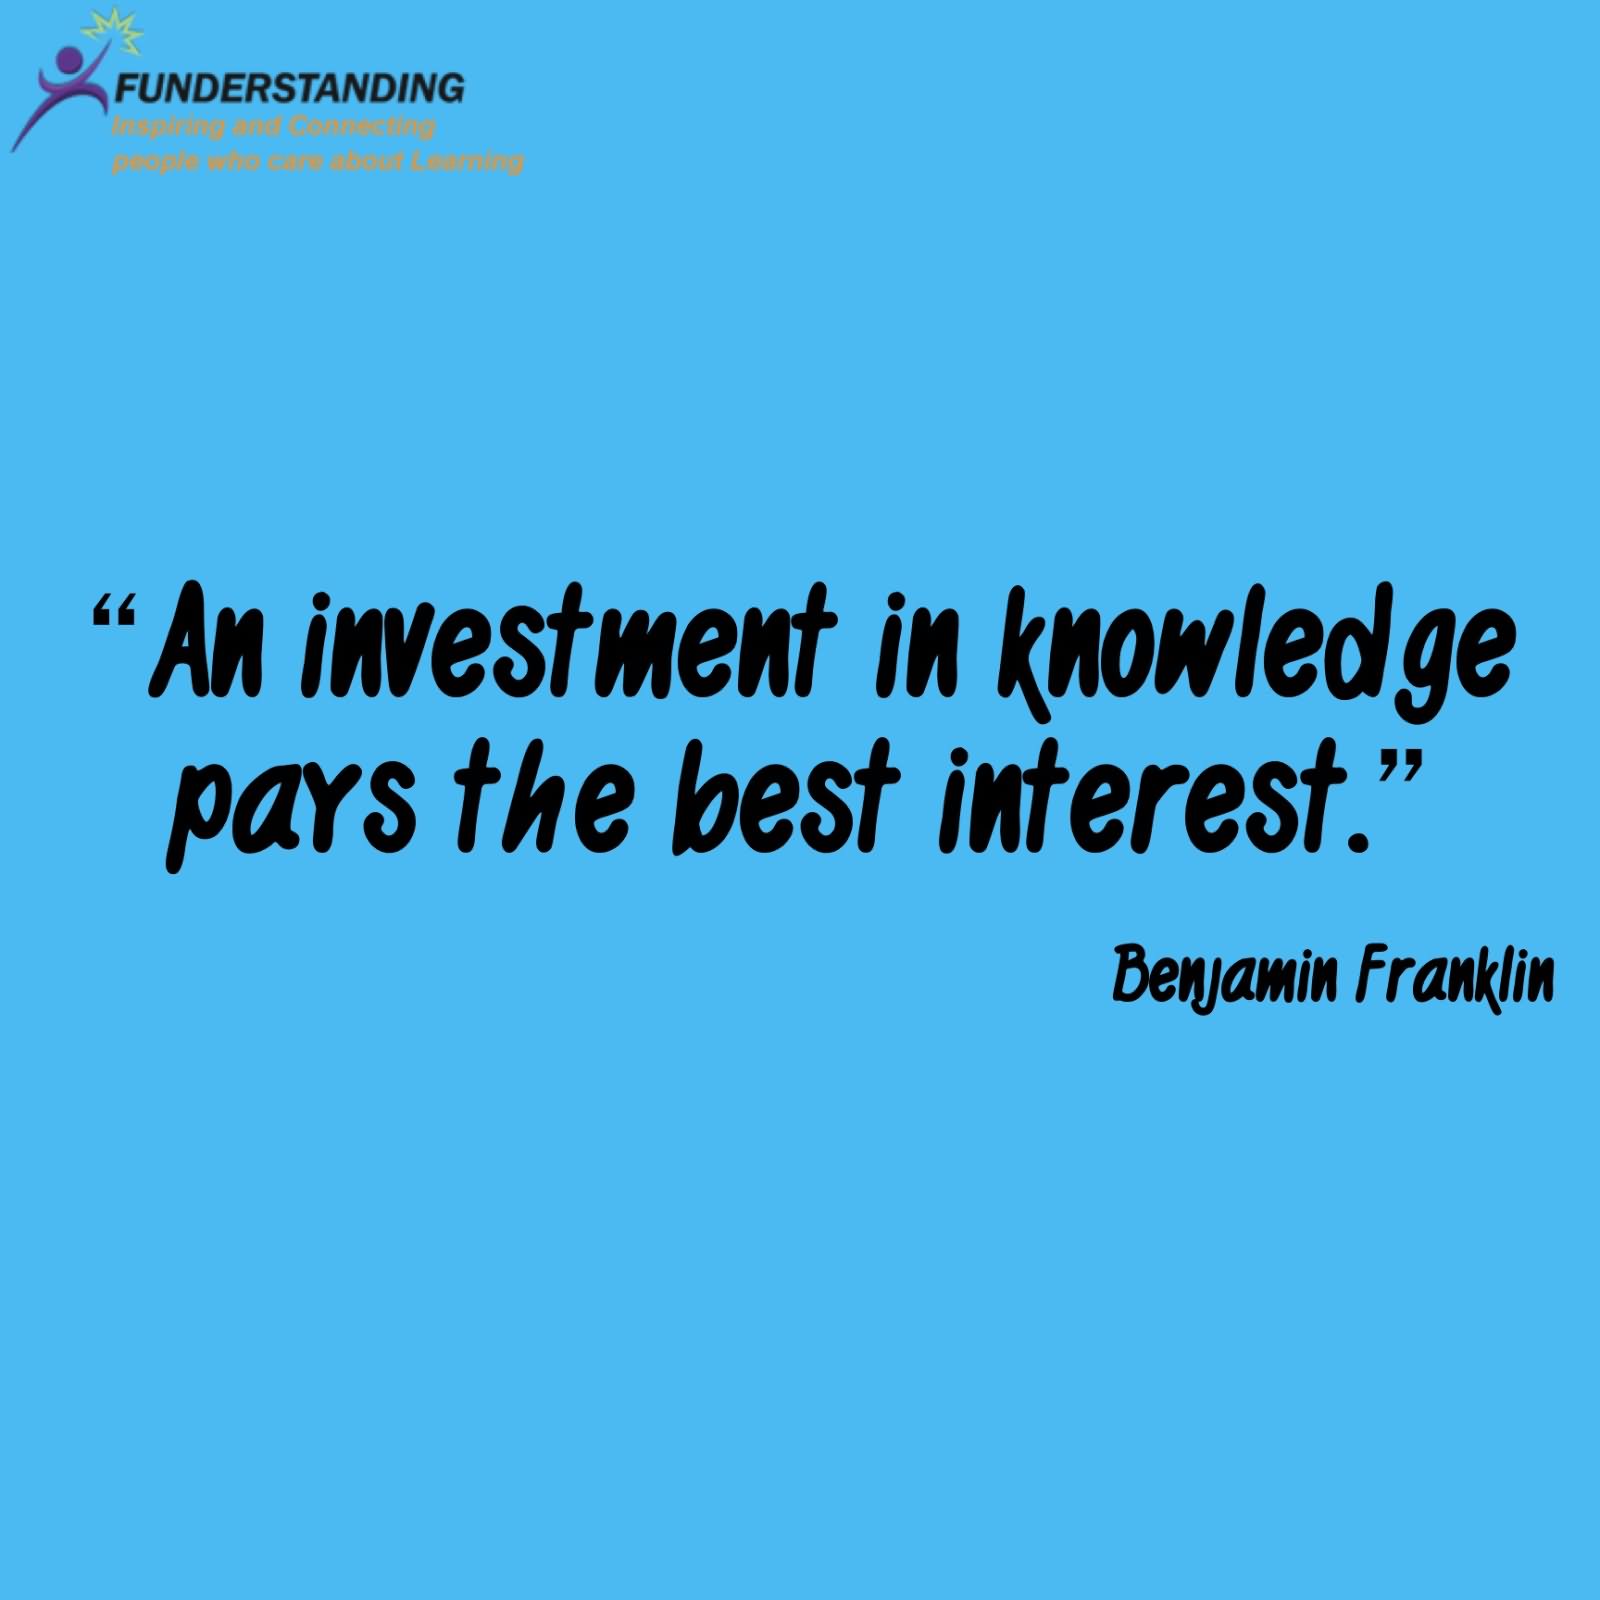 An investment in knowledge pays the best interest.  - Benjamin Franklin